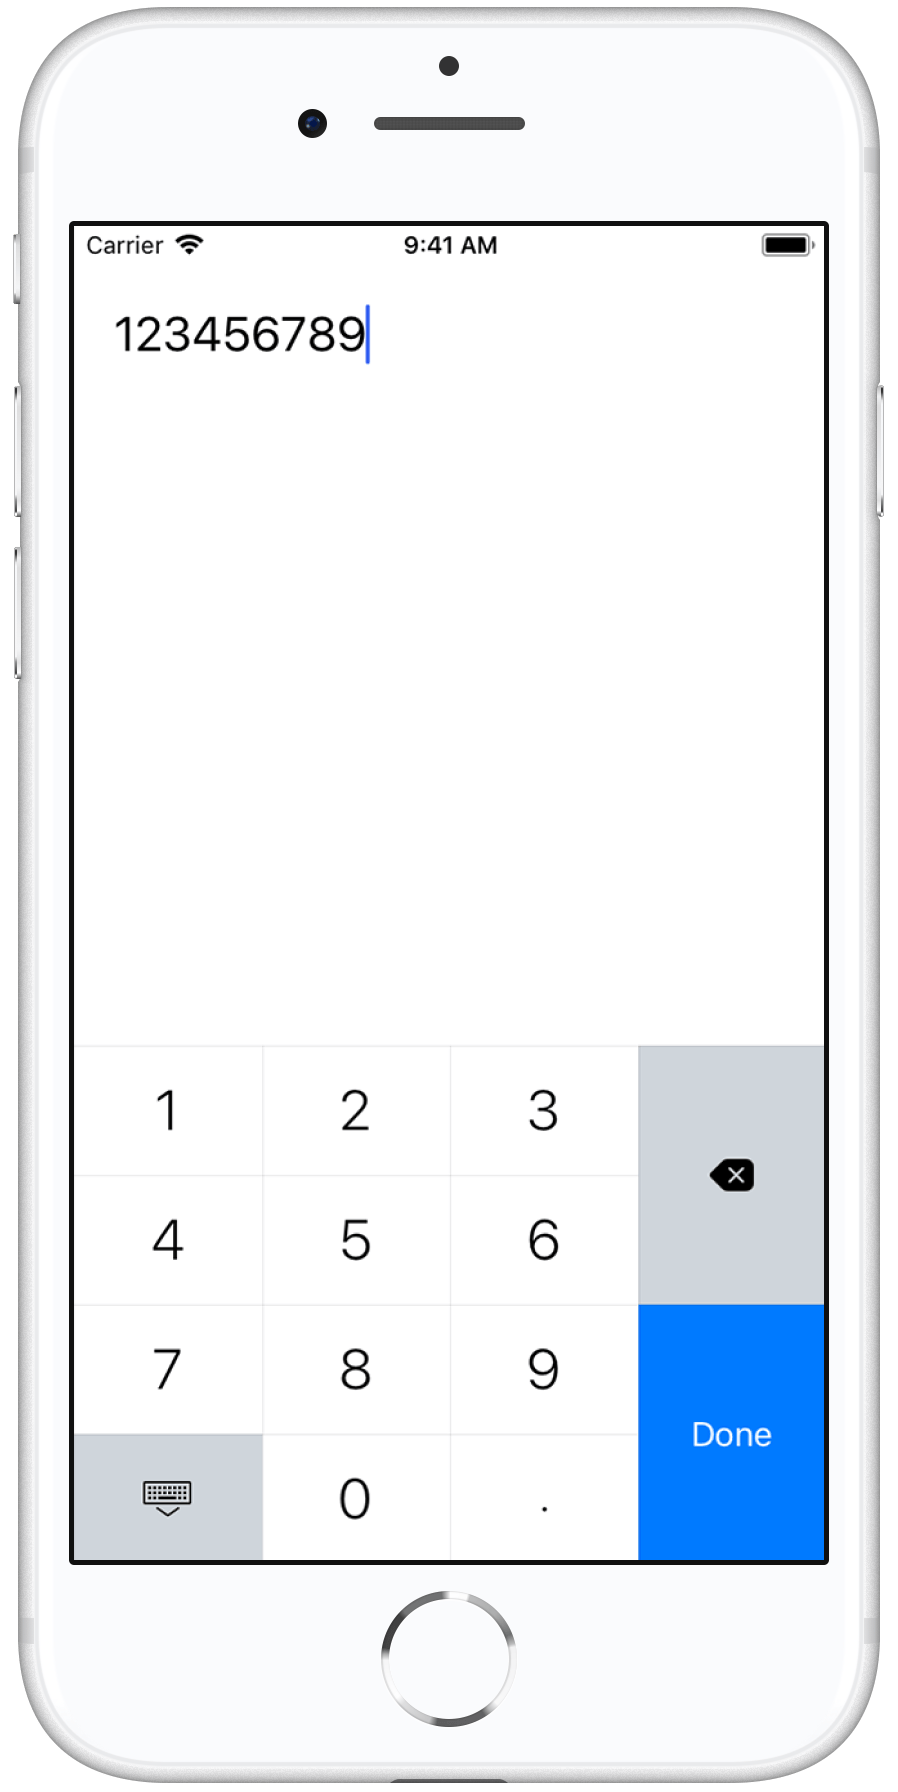 iPhone displaying a simple numeric keyboard on what is seems like a test application.